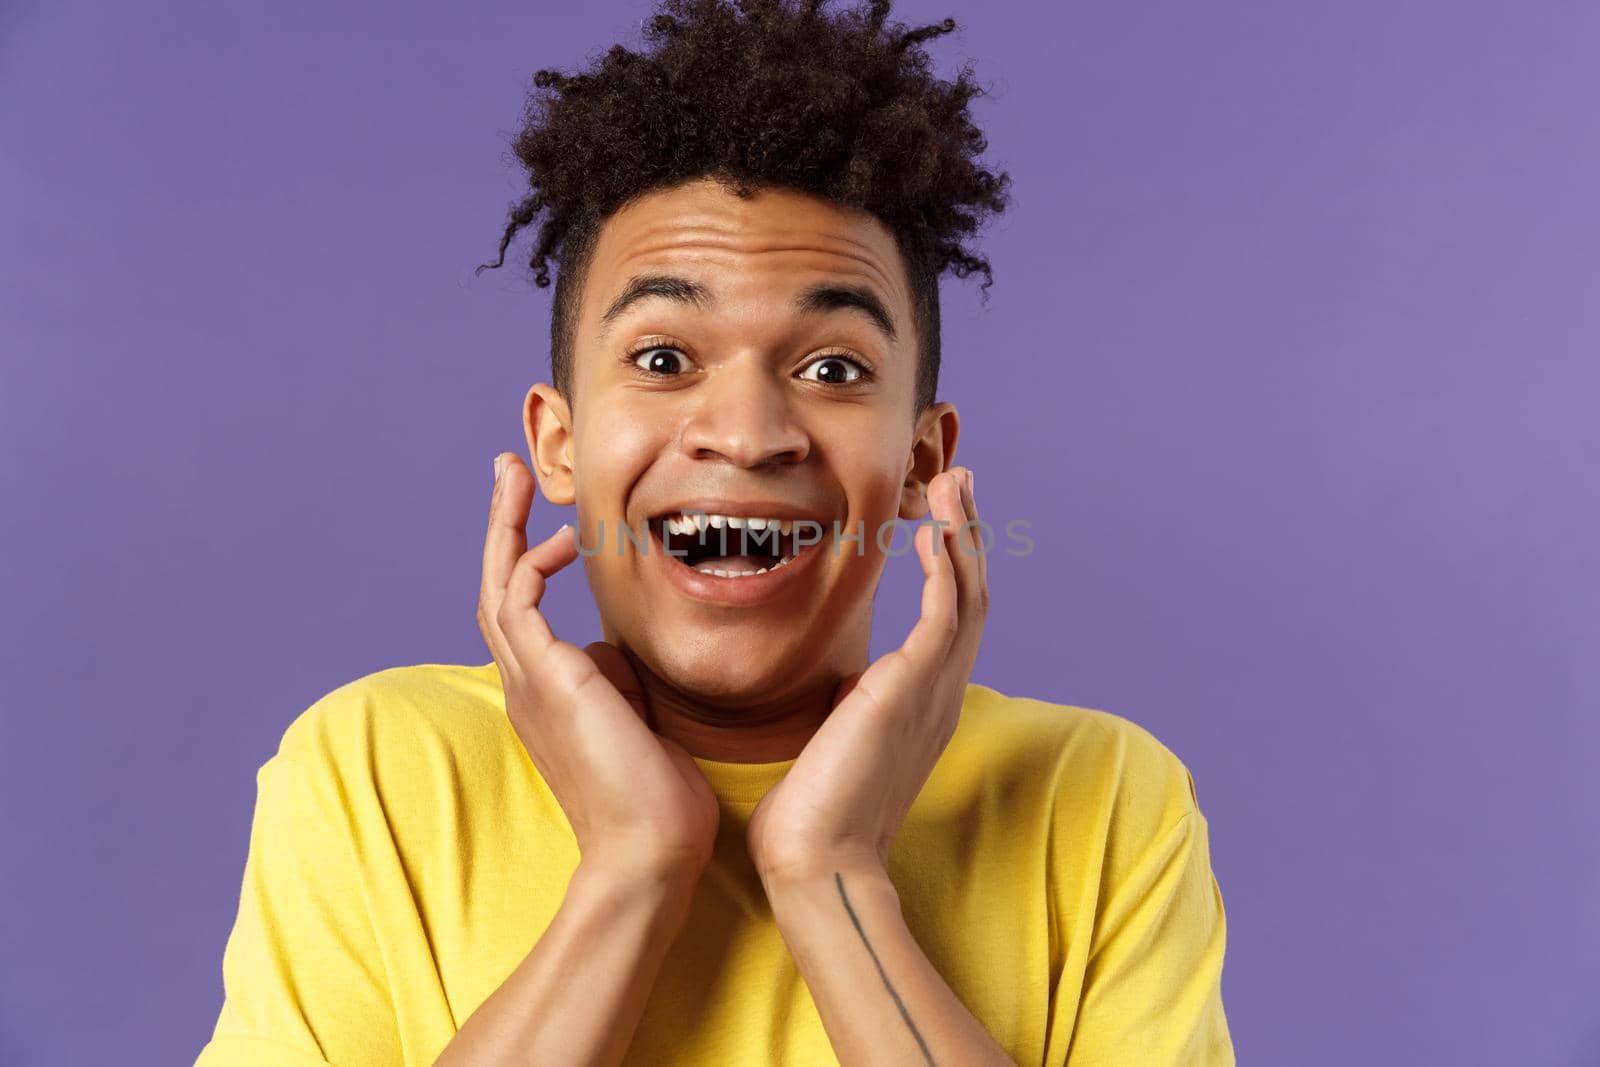 Close-up portrait of extremely happy, enthusiastic young man hear fantastic news, looking surprised and excited, touching face in joy, smiling upbeat look camera astonished, purple background.